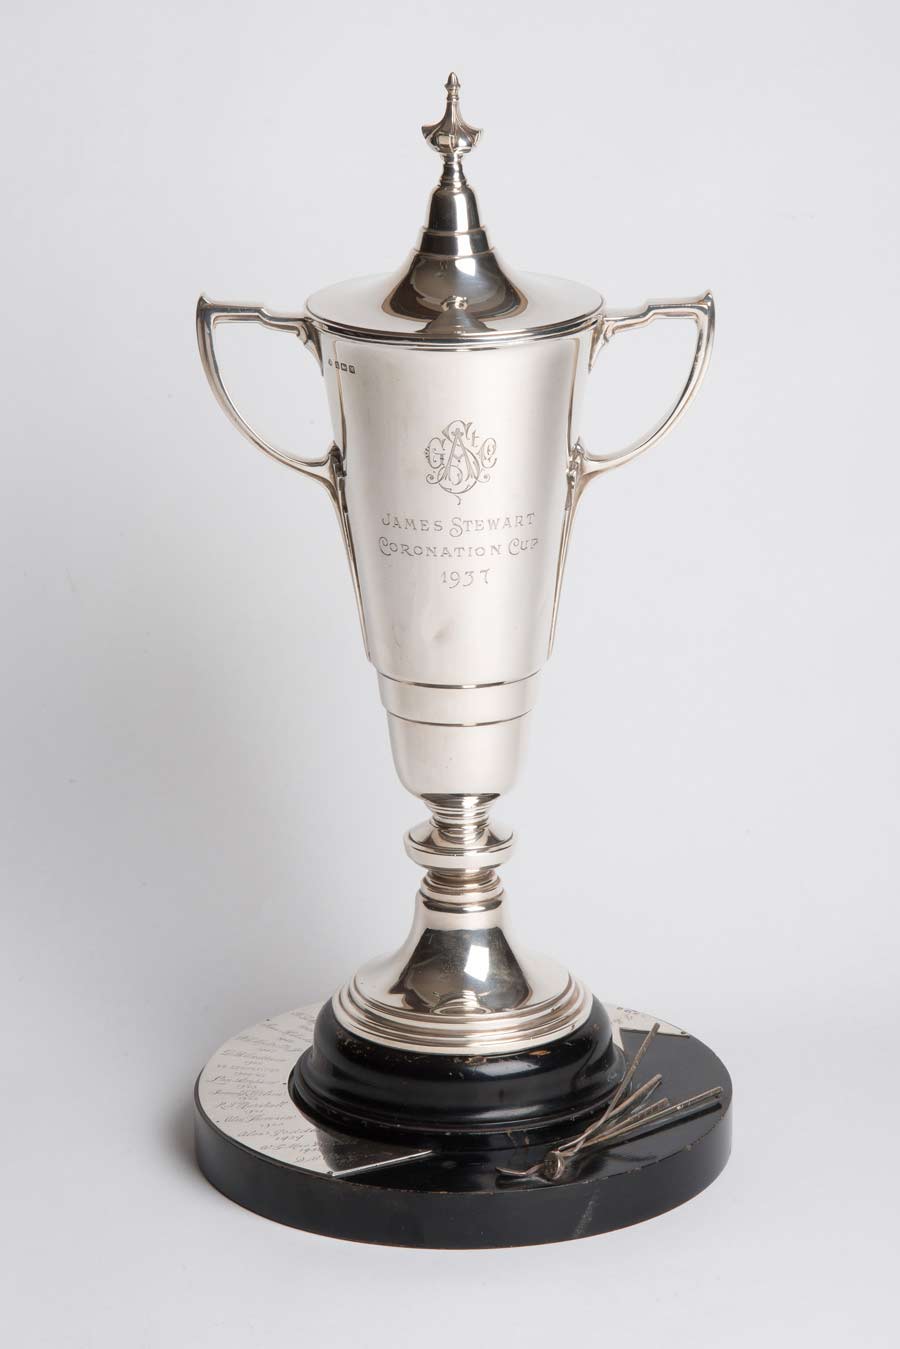 The James Stewart Coronation Cup